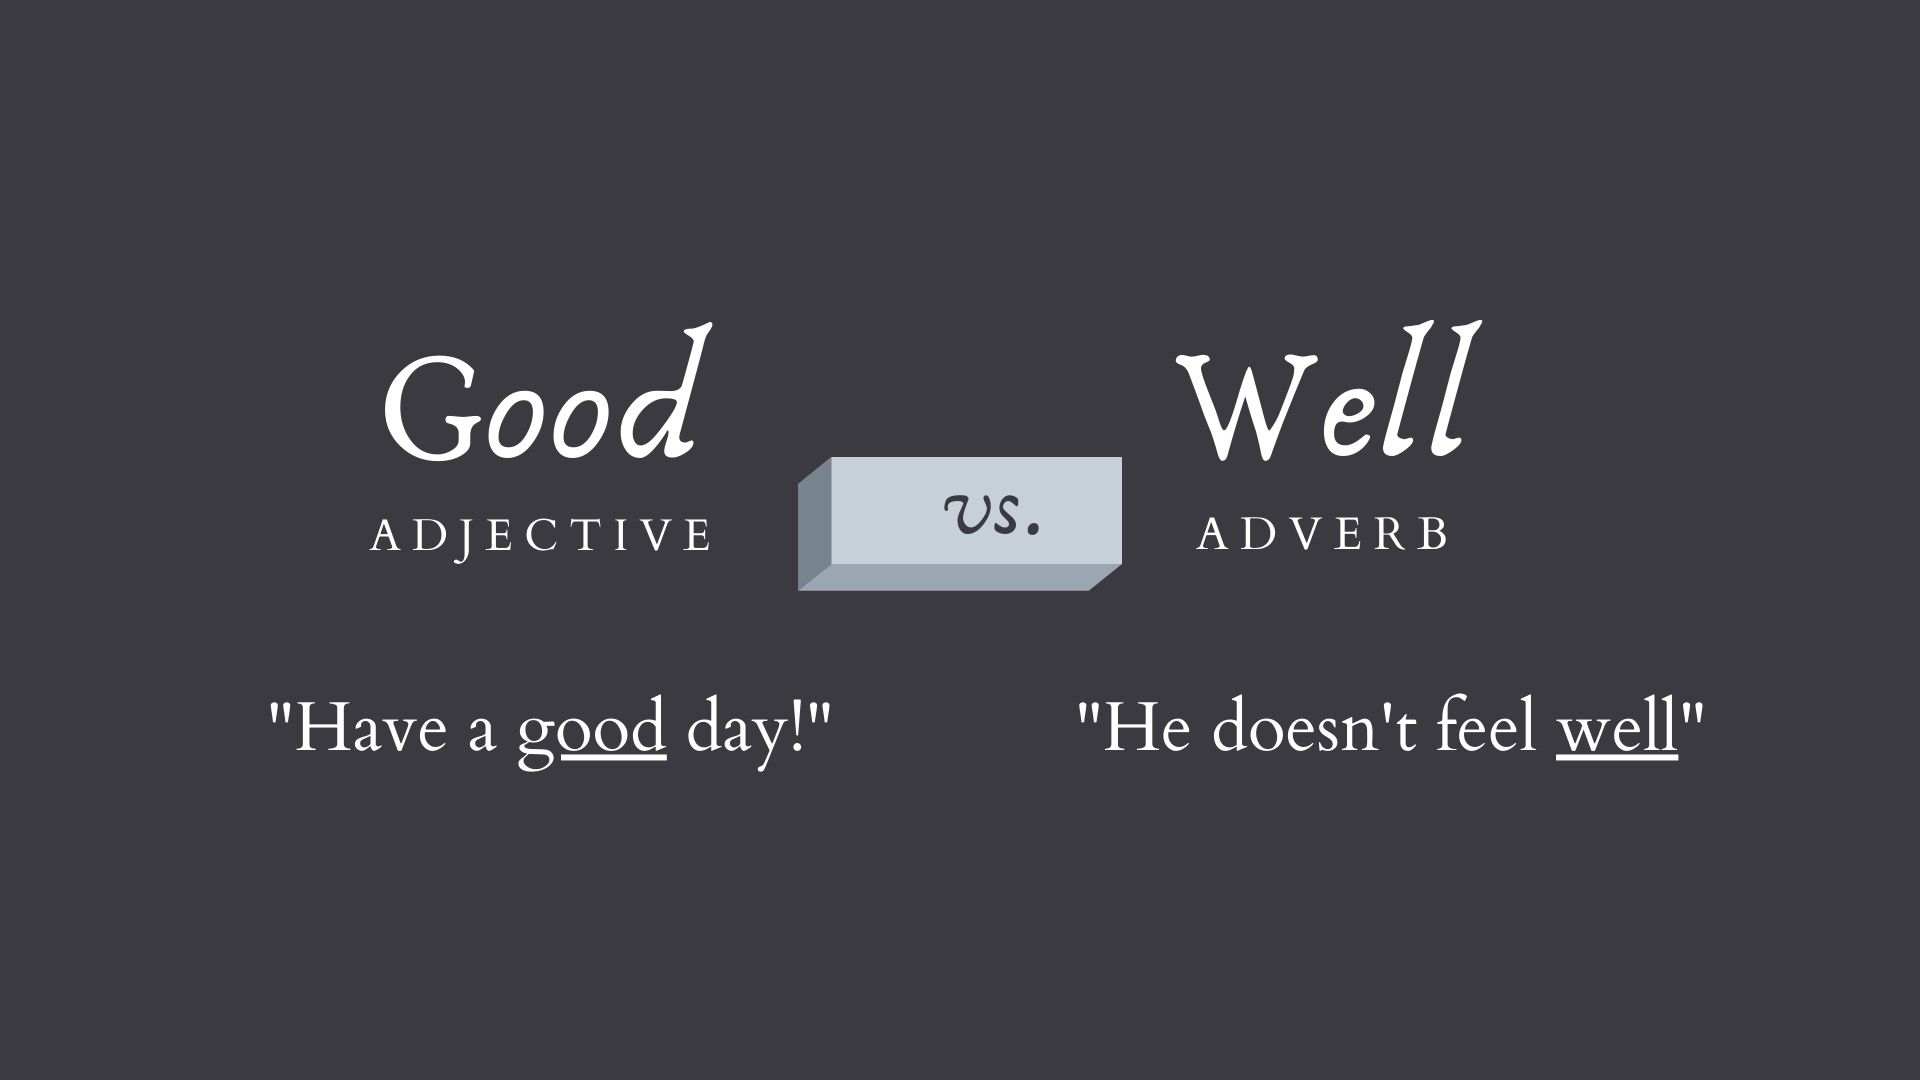 Goof vs. Well: Good is an adjective while Well is an adverb